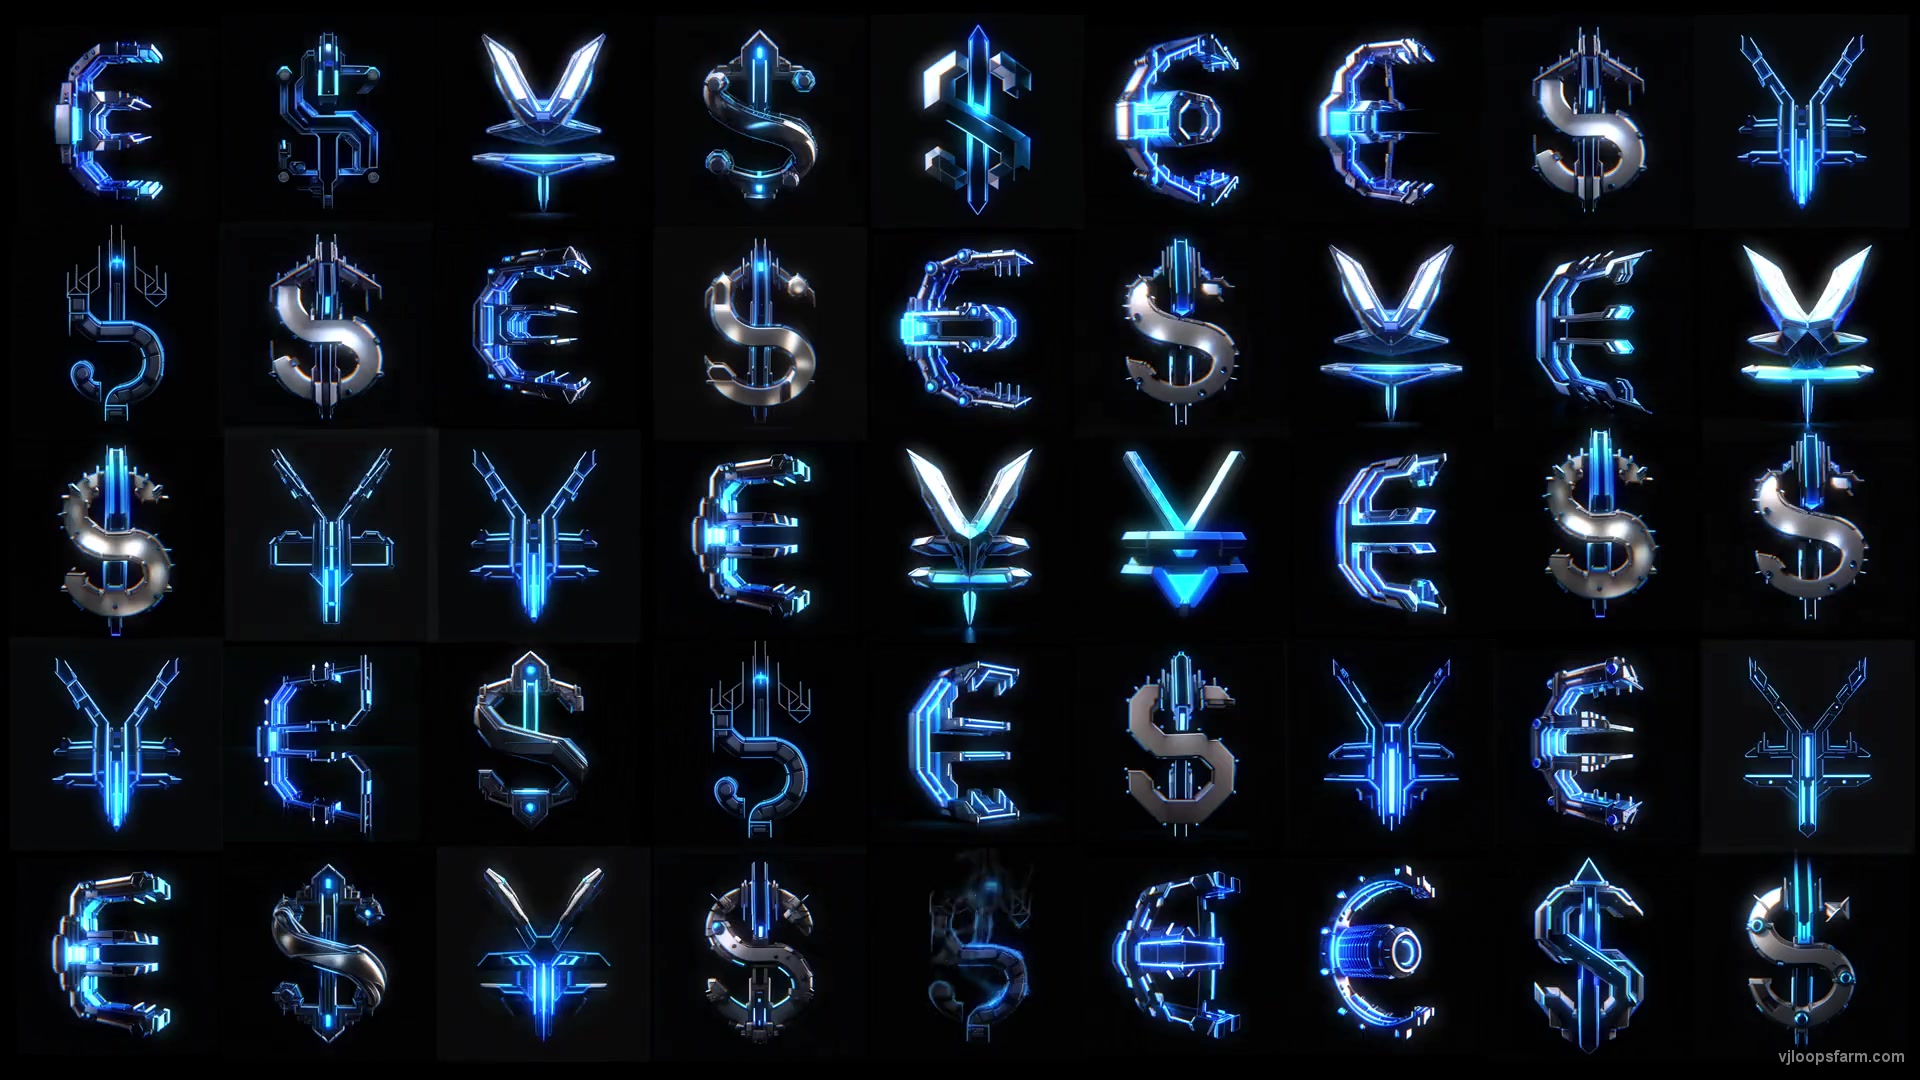 Cyberpunk Currency EUR USD YUN Isolated on Black Background Ultra HD Video